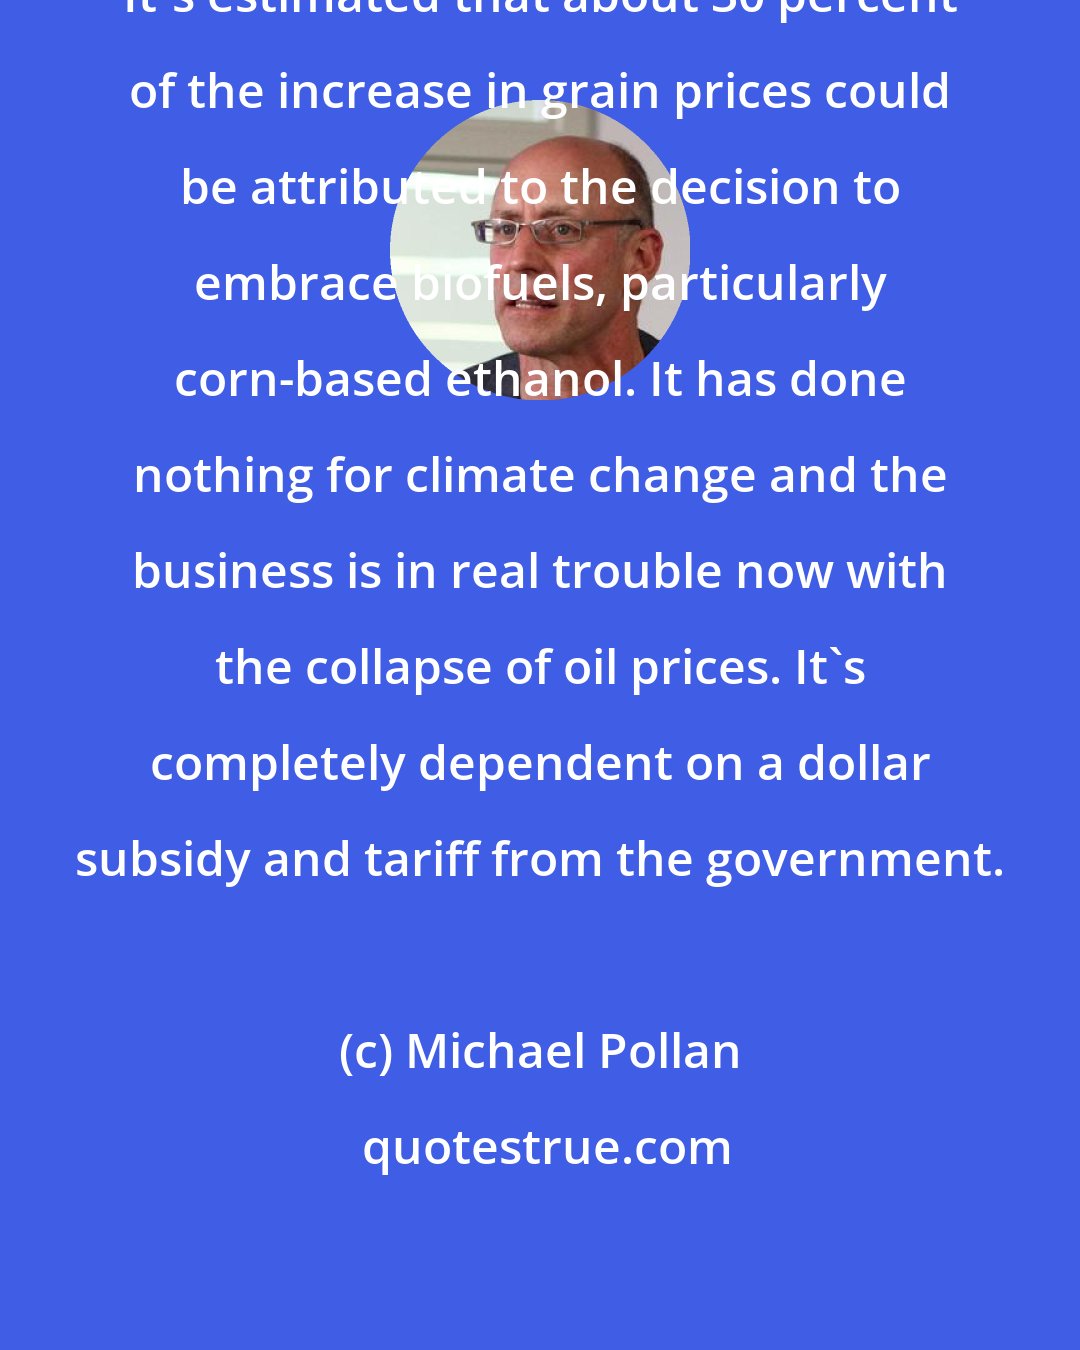 Michael Pollan: It's estimated that about 30 percent of the increase in grain prices could be attributed to the decision to embrace biofuels, particularly corn-based ethanol. It has done nothing for climate change and the business is in real trouble now with the collapse of oil prices. It's completely dependent on a dollar subsidy and tariff from the government.